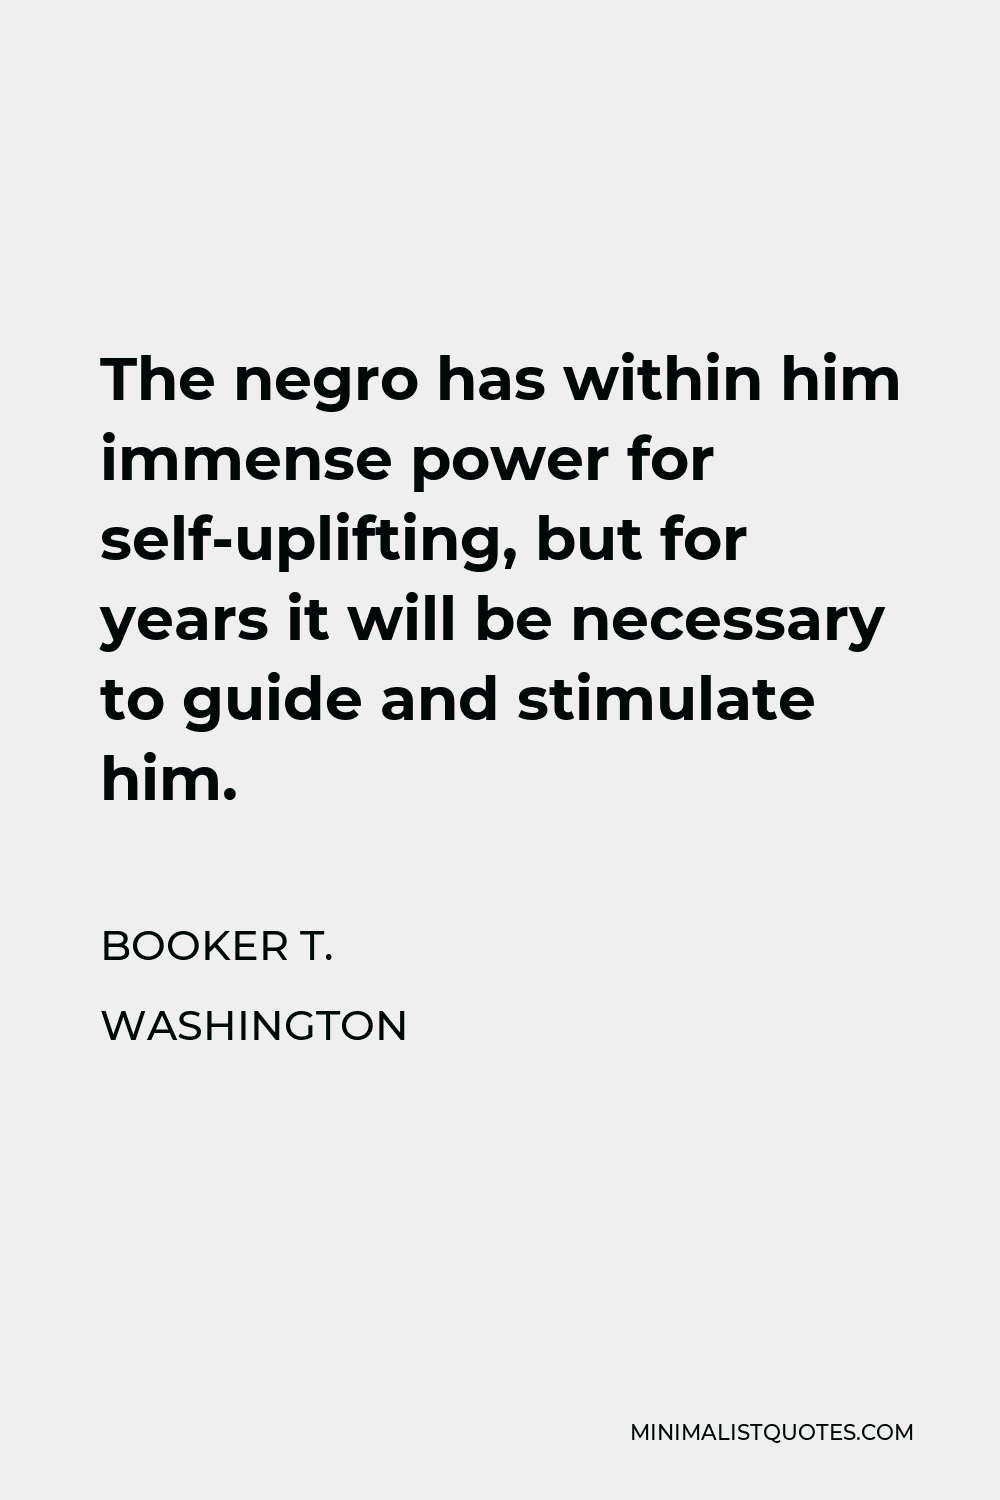 Booker T. Washington Quote - The negro has within him immense power for self-uplifting, but for years it will be necessary to guide and stimulate him.